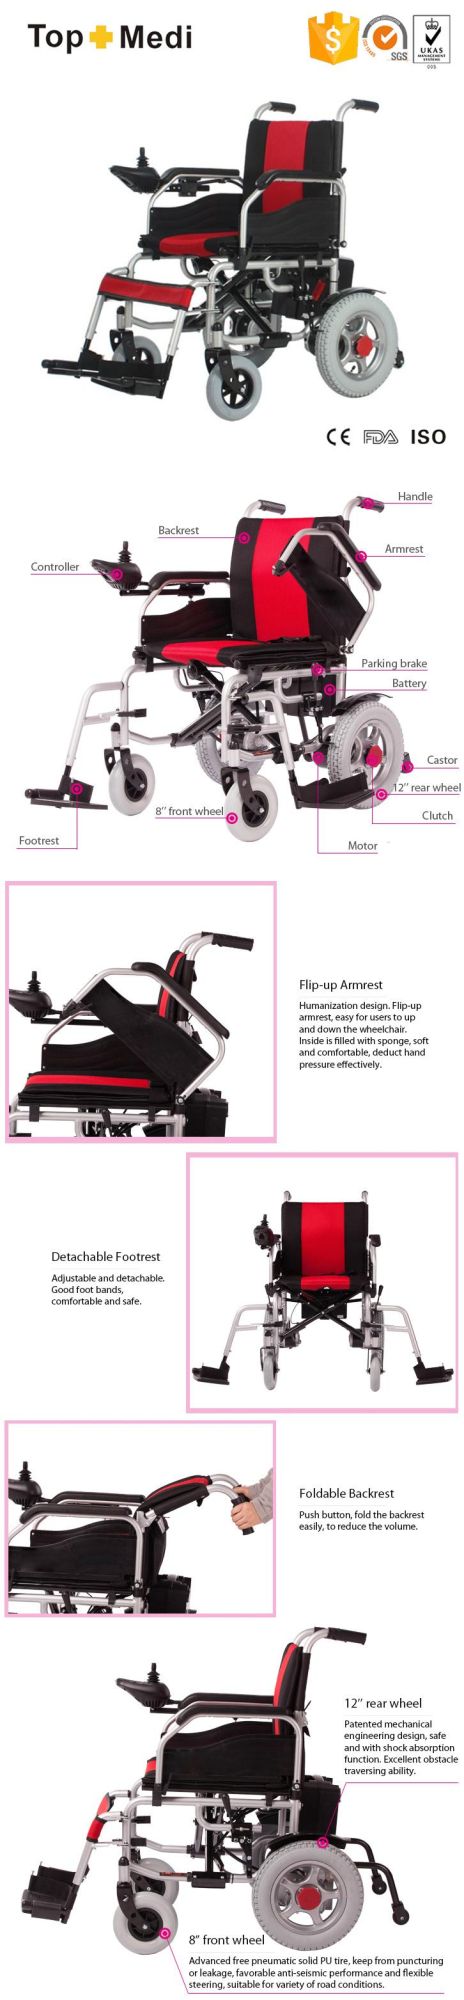 Medical Equipment Wheelchair Disabled Folding Motorized Electric Wheel Chair